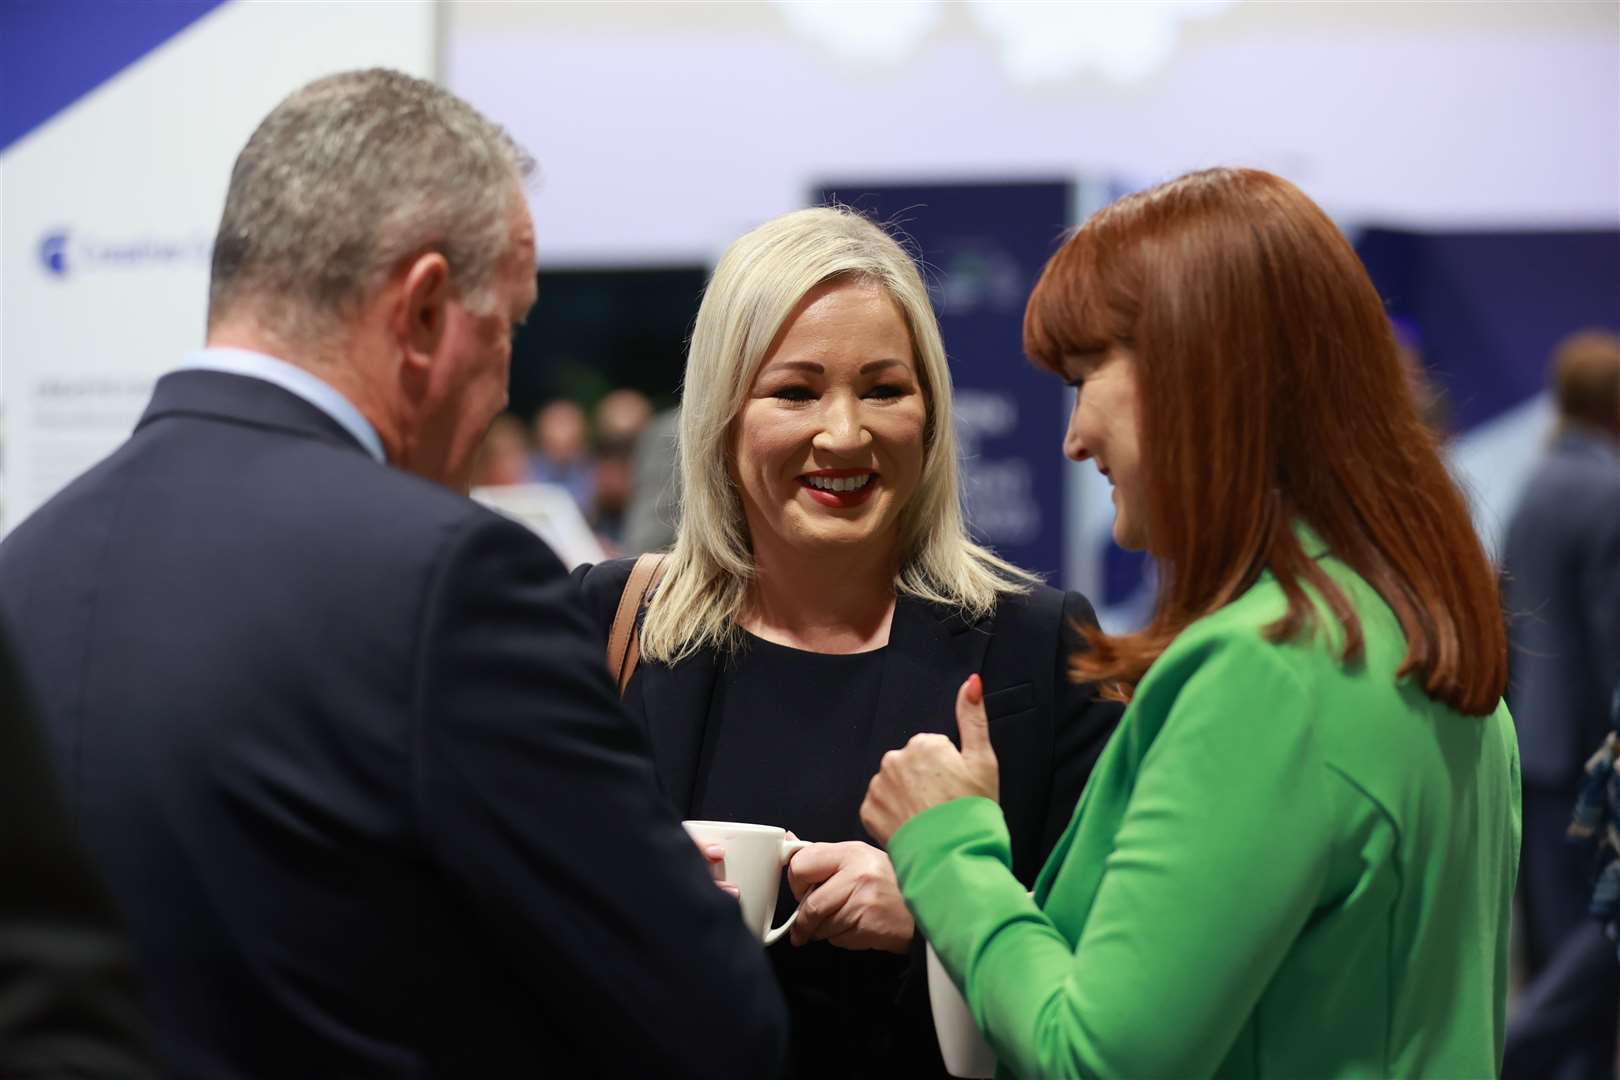 Sinn Fein Stormont leader Michelle O’Neill, centre, was among those attending the summit (Liam McBurney/PA)